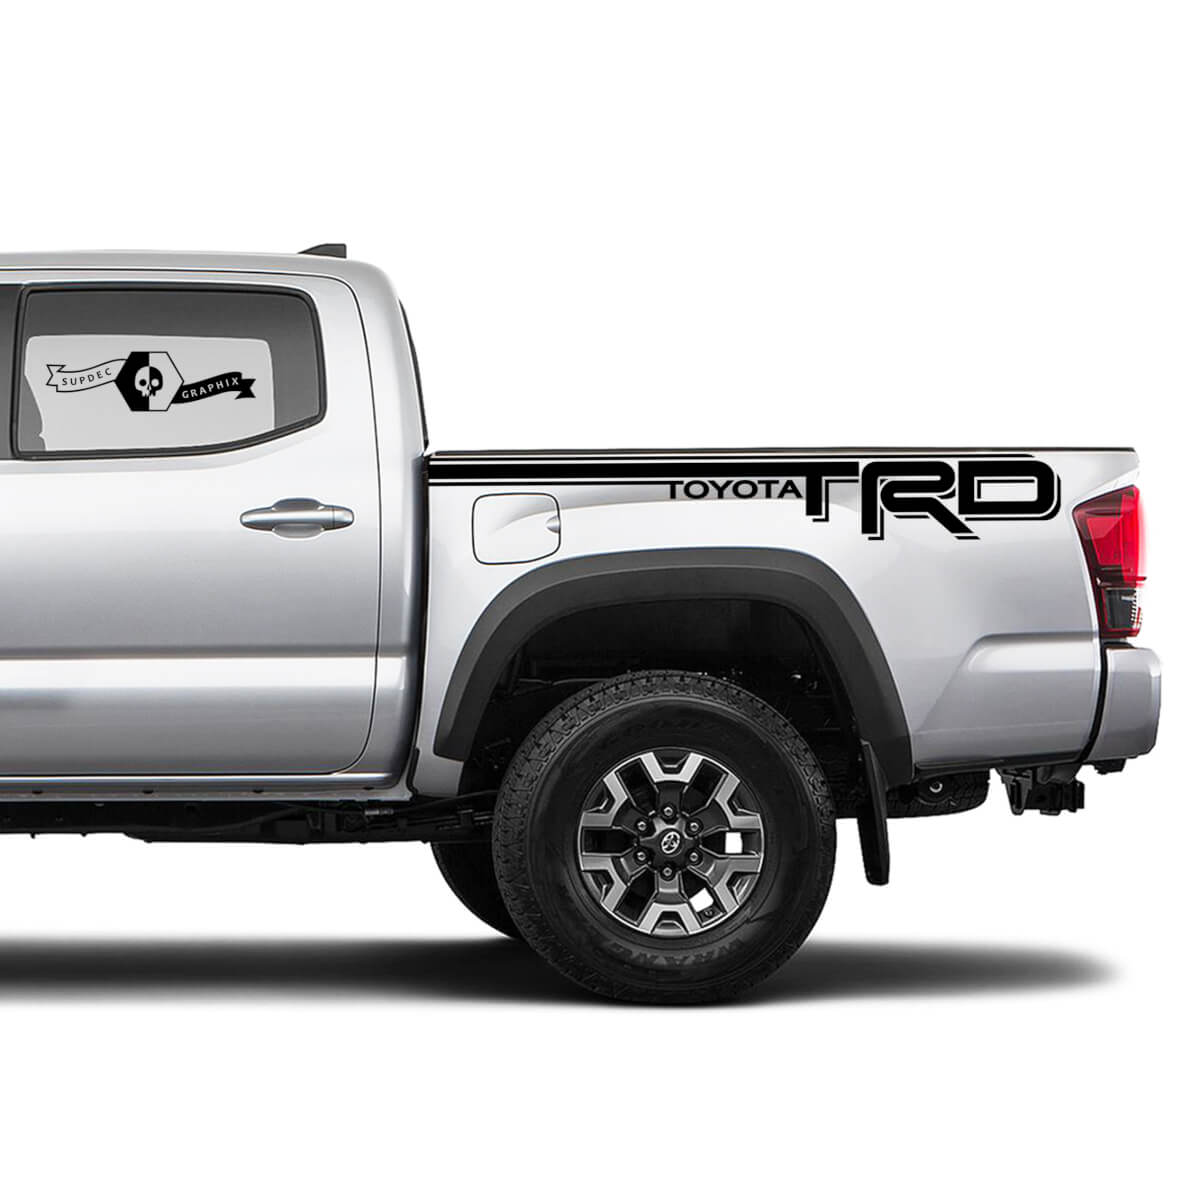 TRD Racing Development Side Truck Panel Decals Stickers for Toyota Tacoma Tundra FJ Cruiser 4Runner